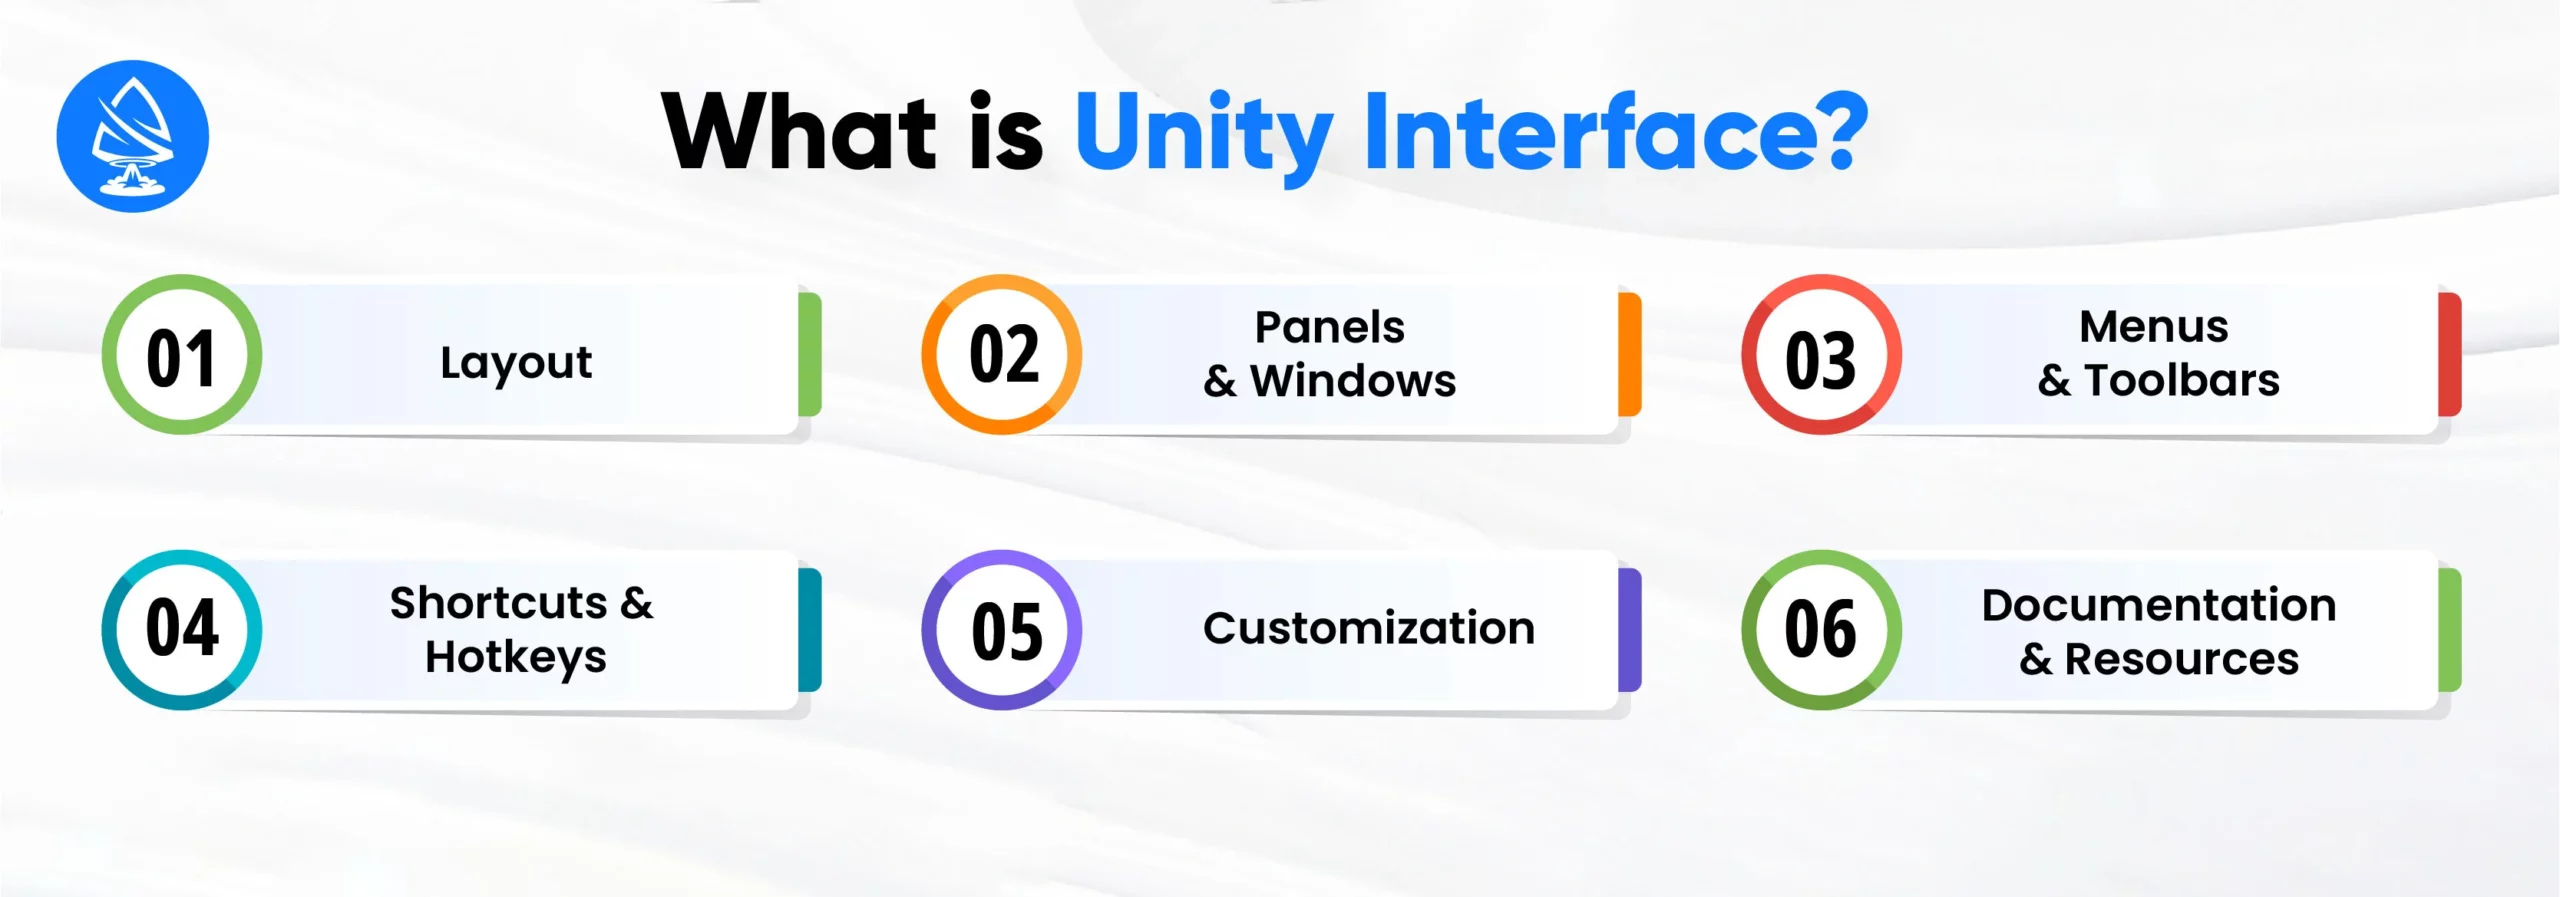 What is Unity Interface 